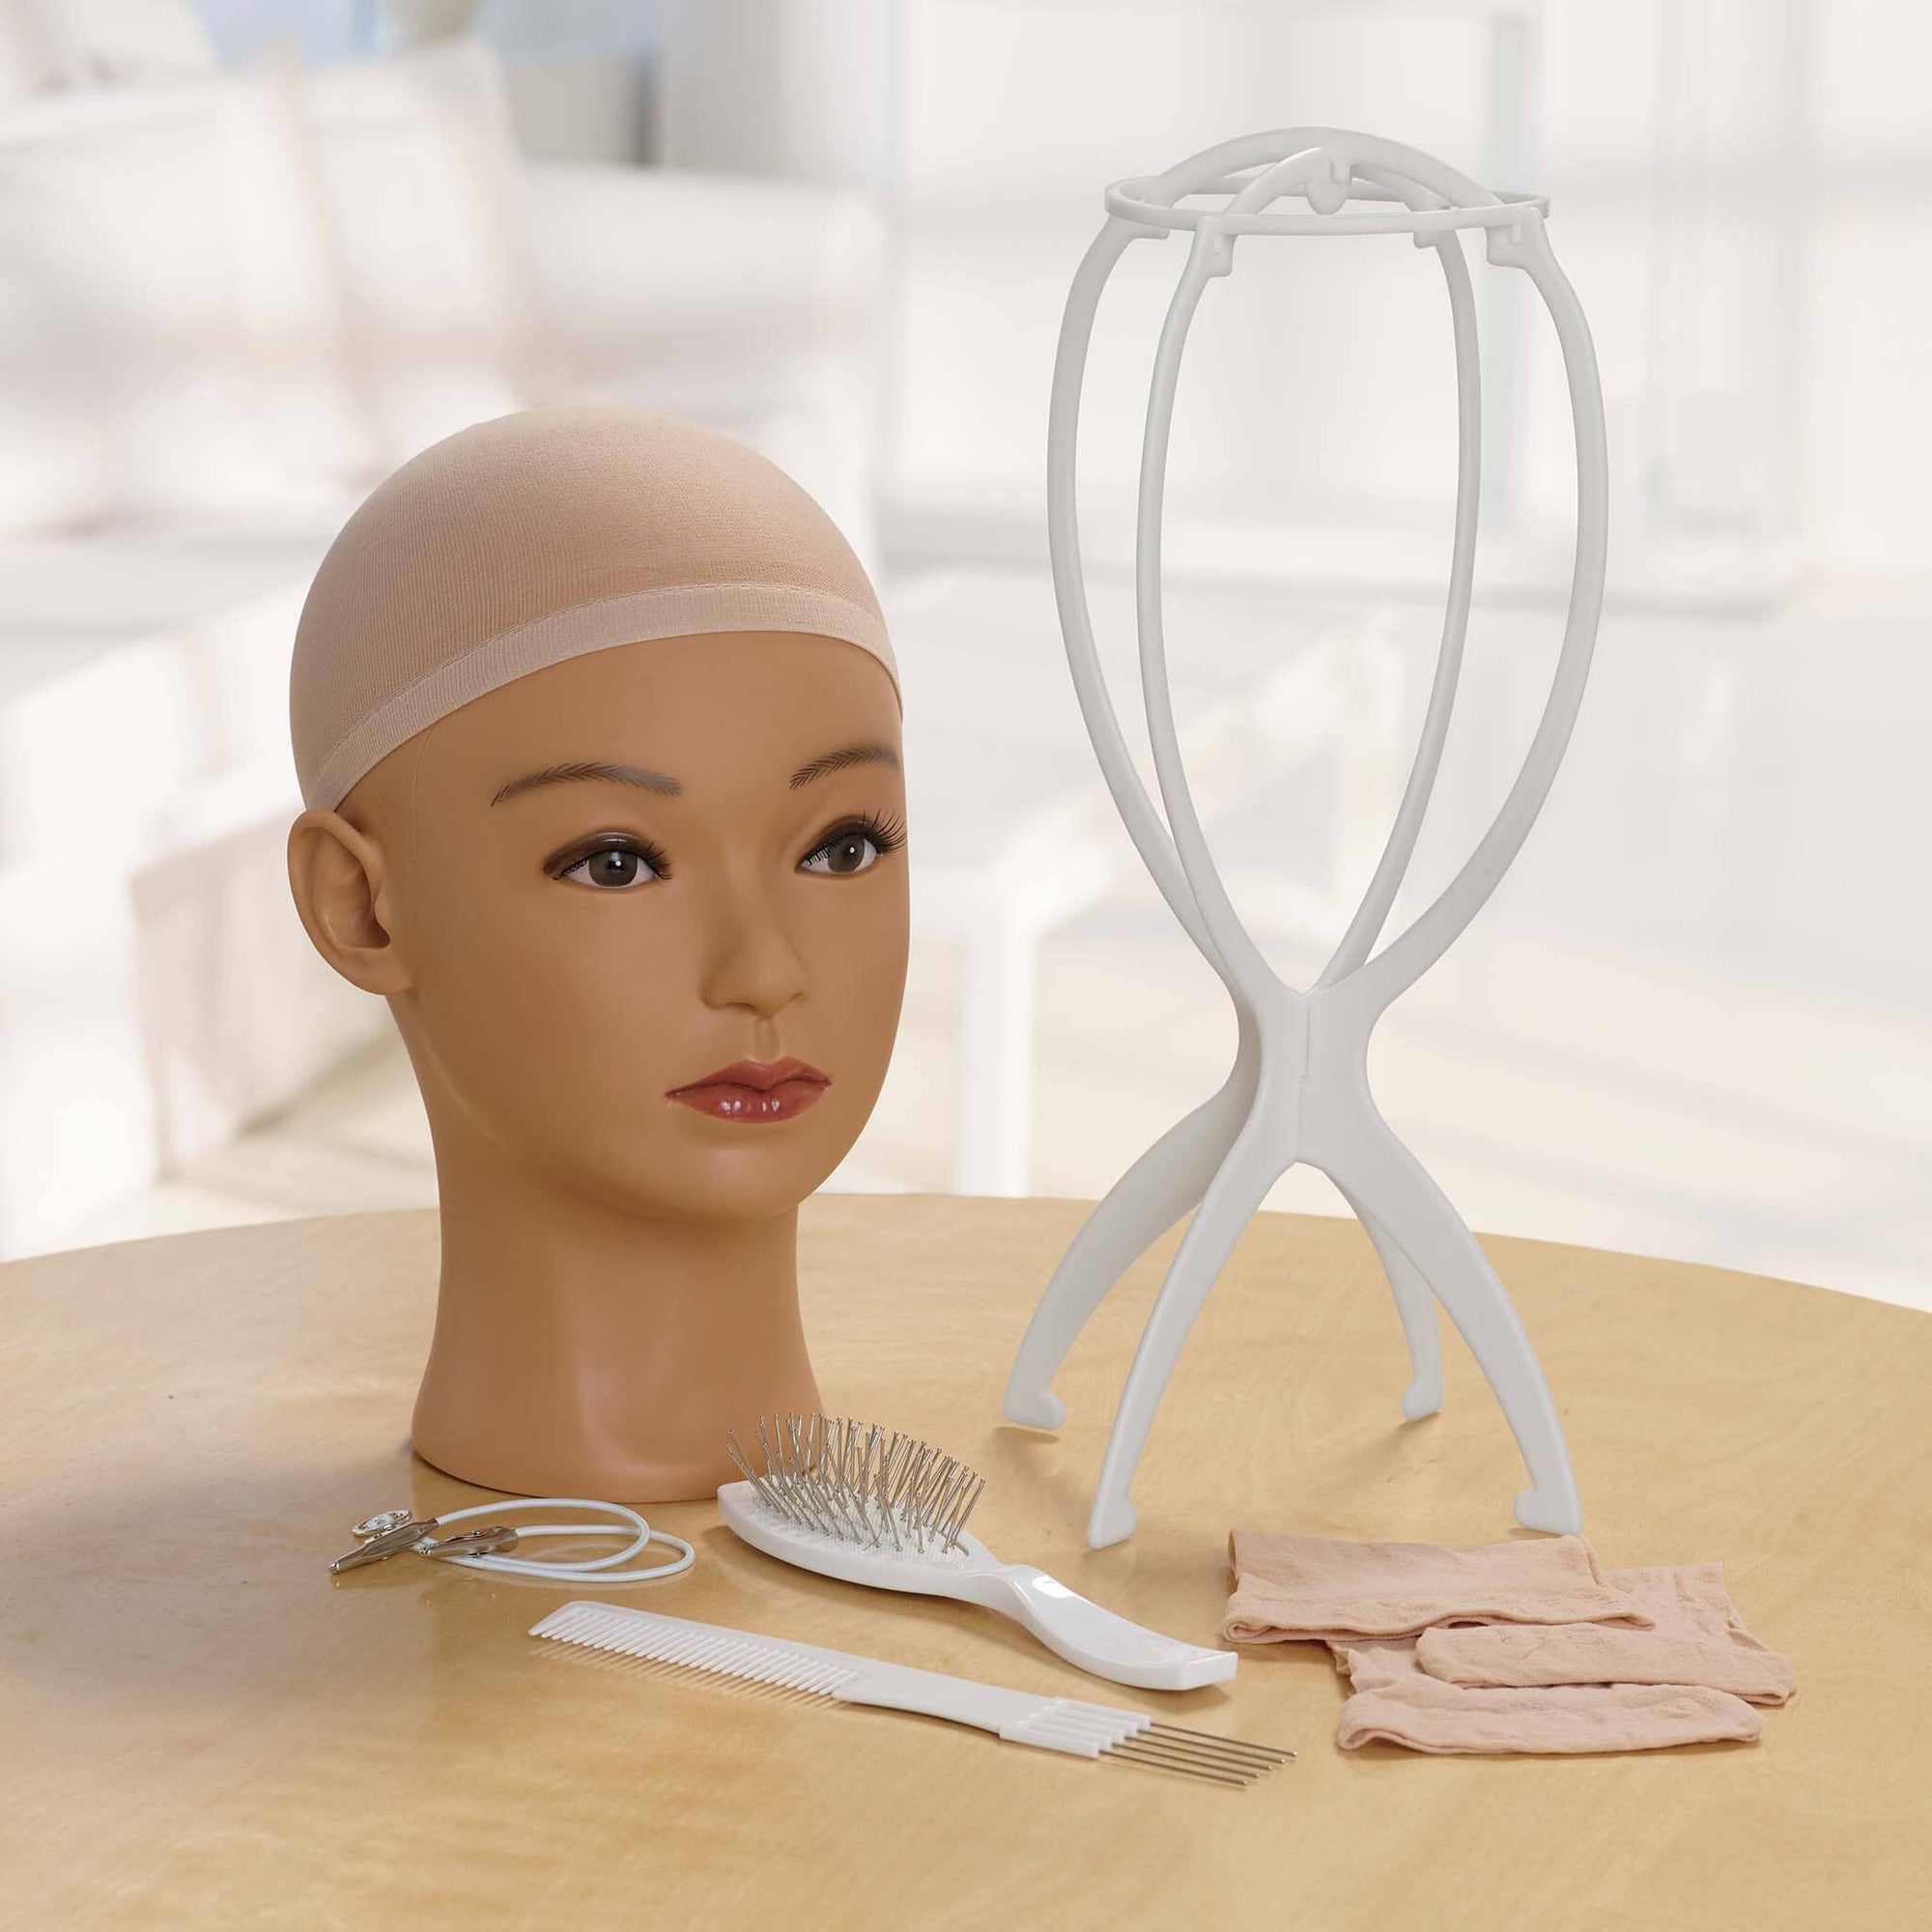 Collapsible Metal Wig Stand - Cancer & Chemotherapy Wig